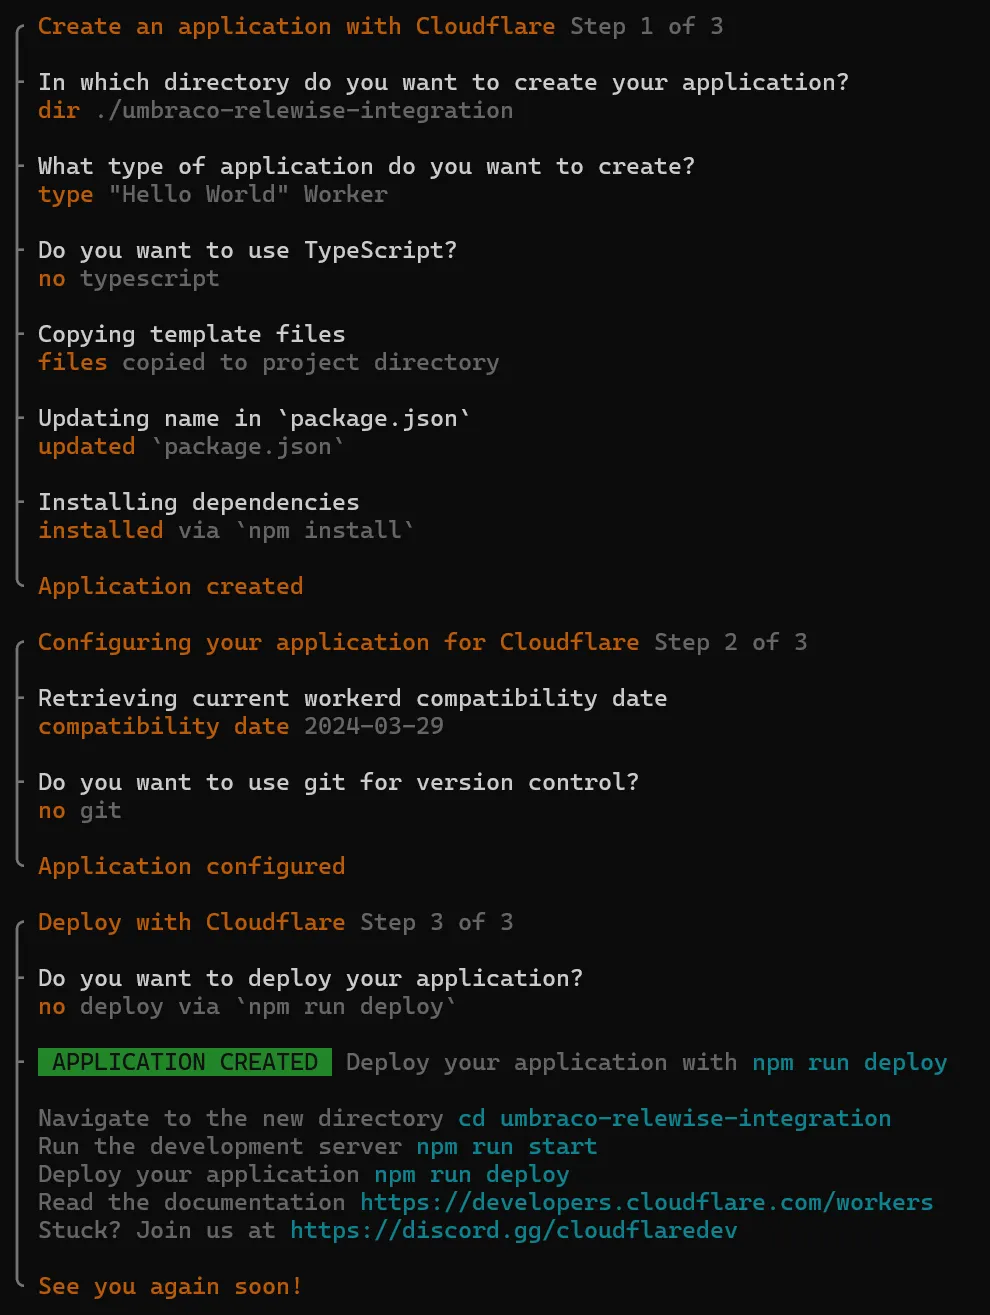 The Cloudflare CLI setting up a Worker project